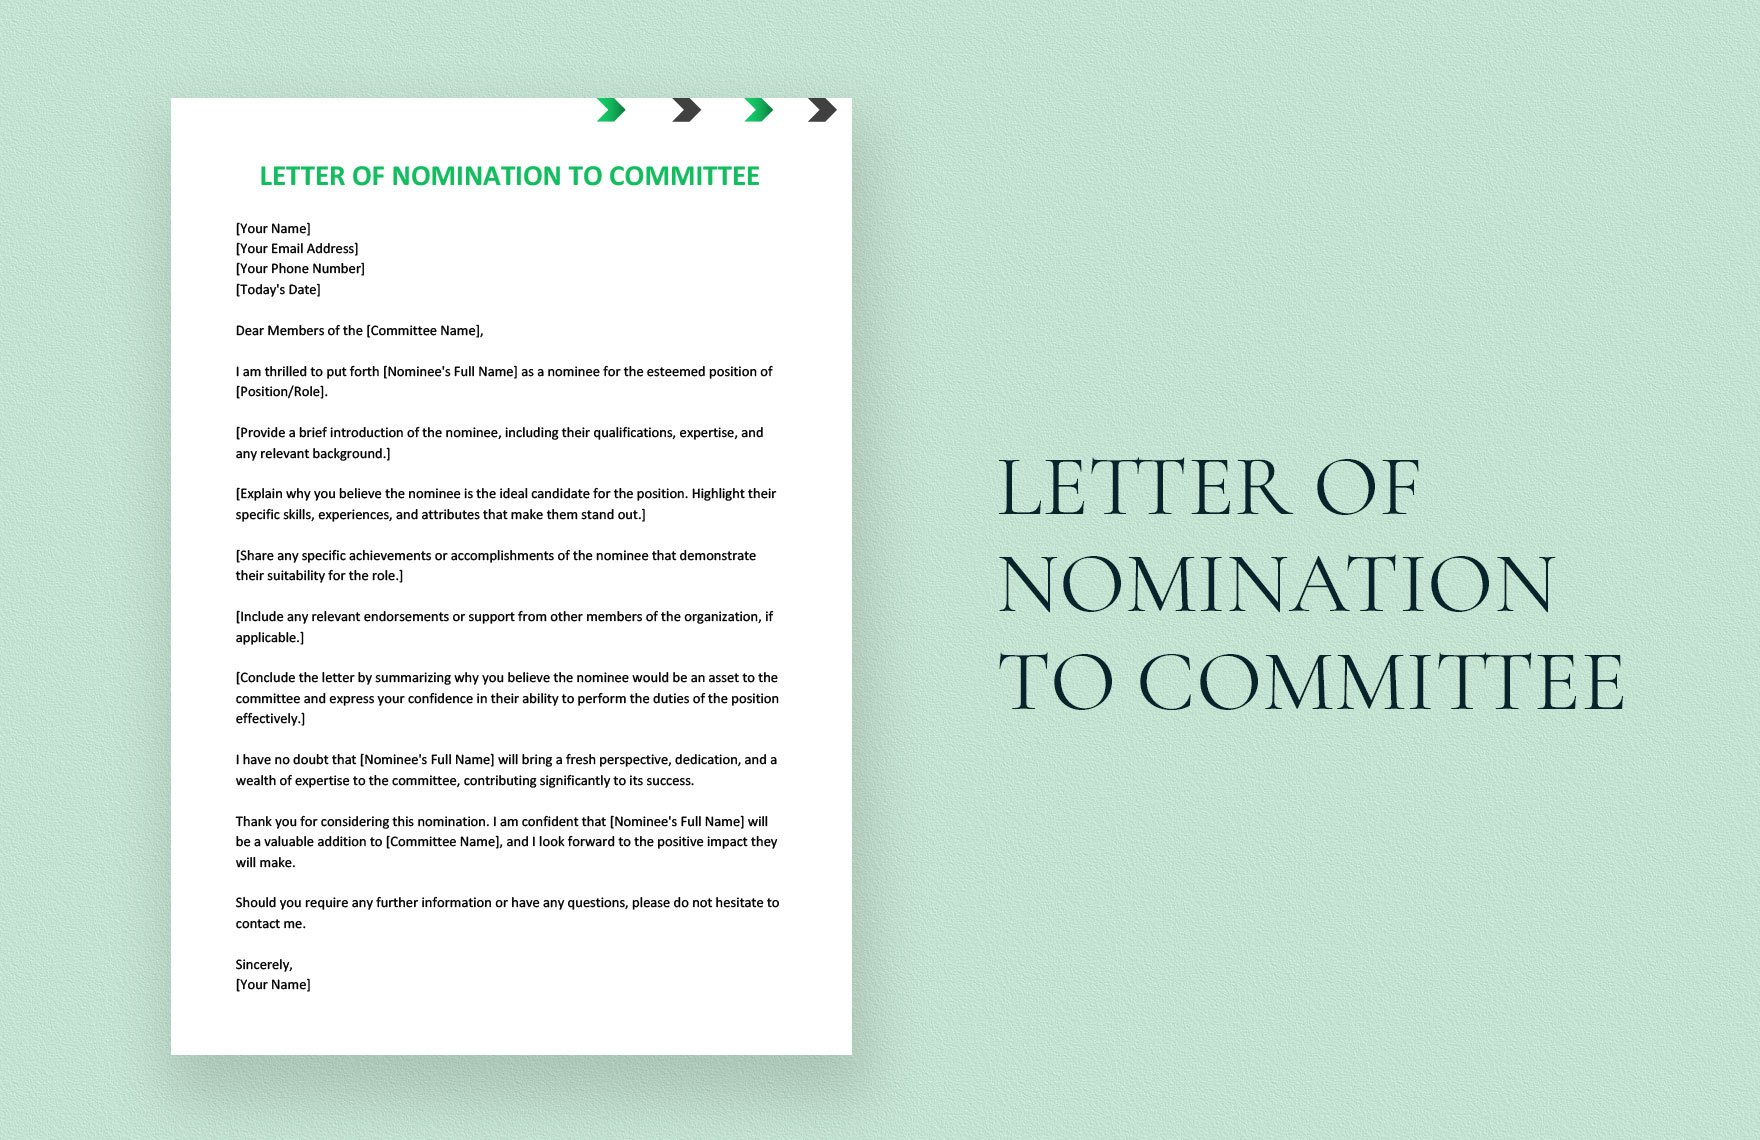 Letter of Nomination to Committee in Word, Google Docs